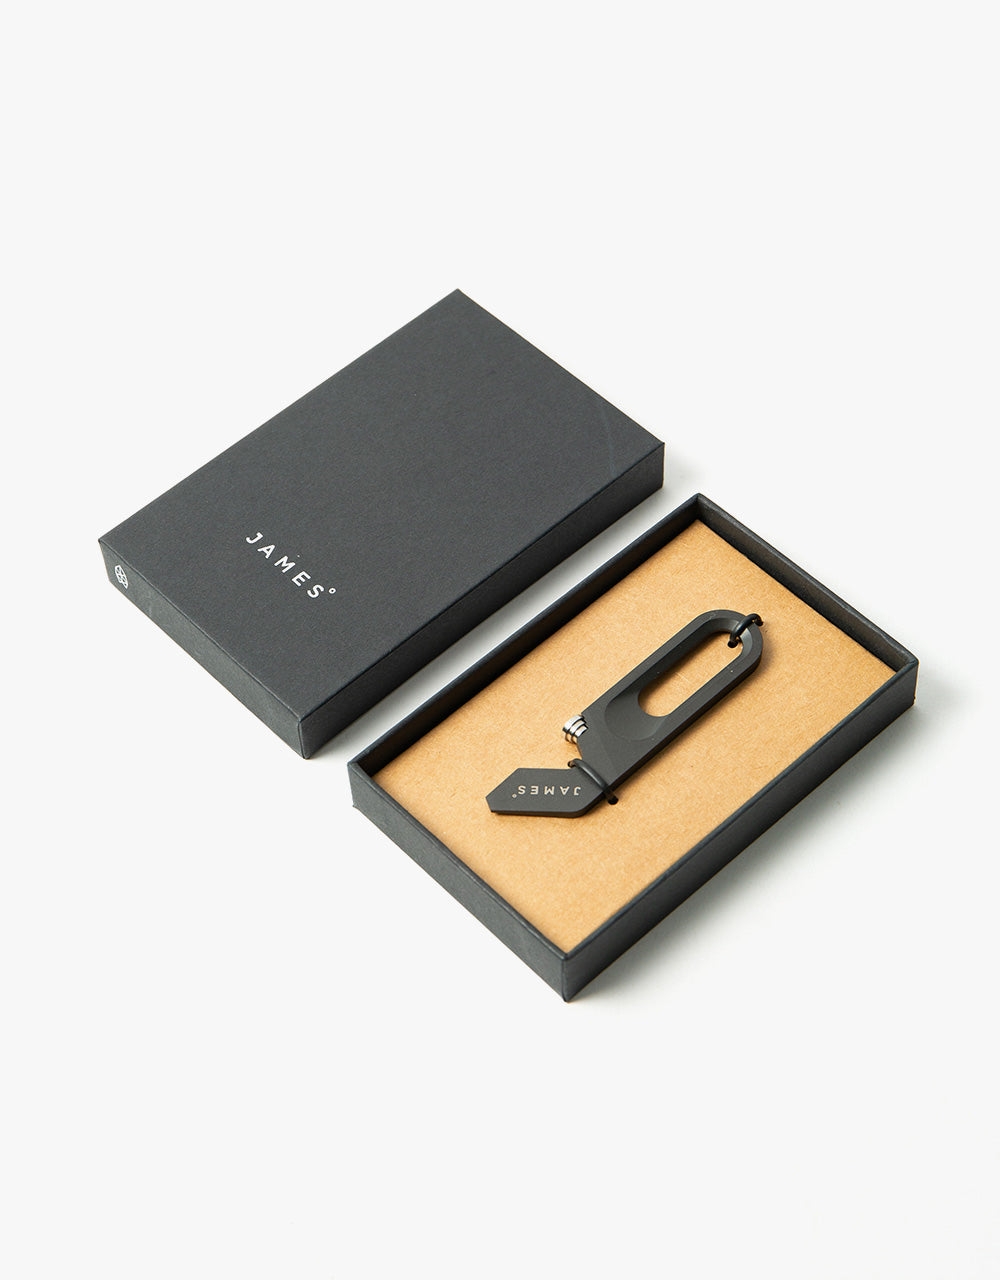 James The Halifax Tool - Black/Stainless